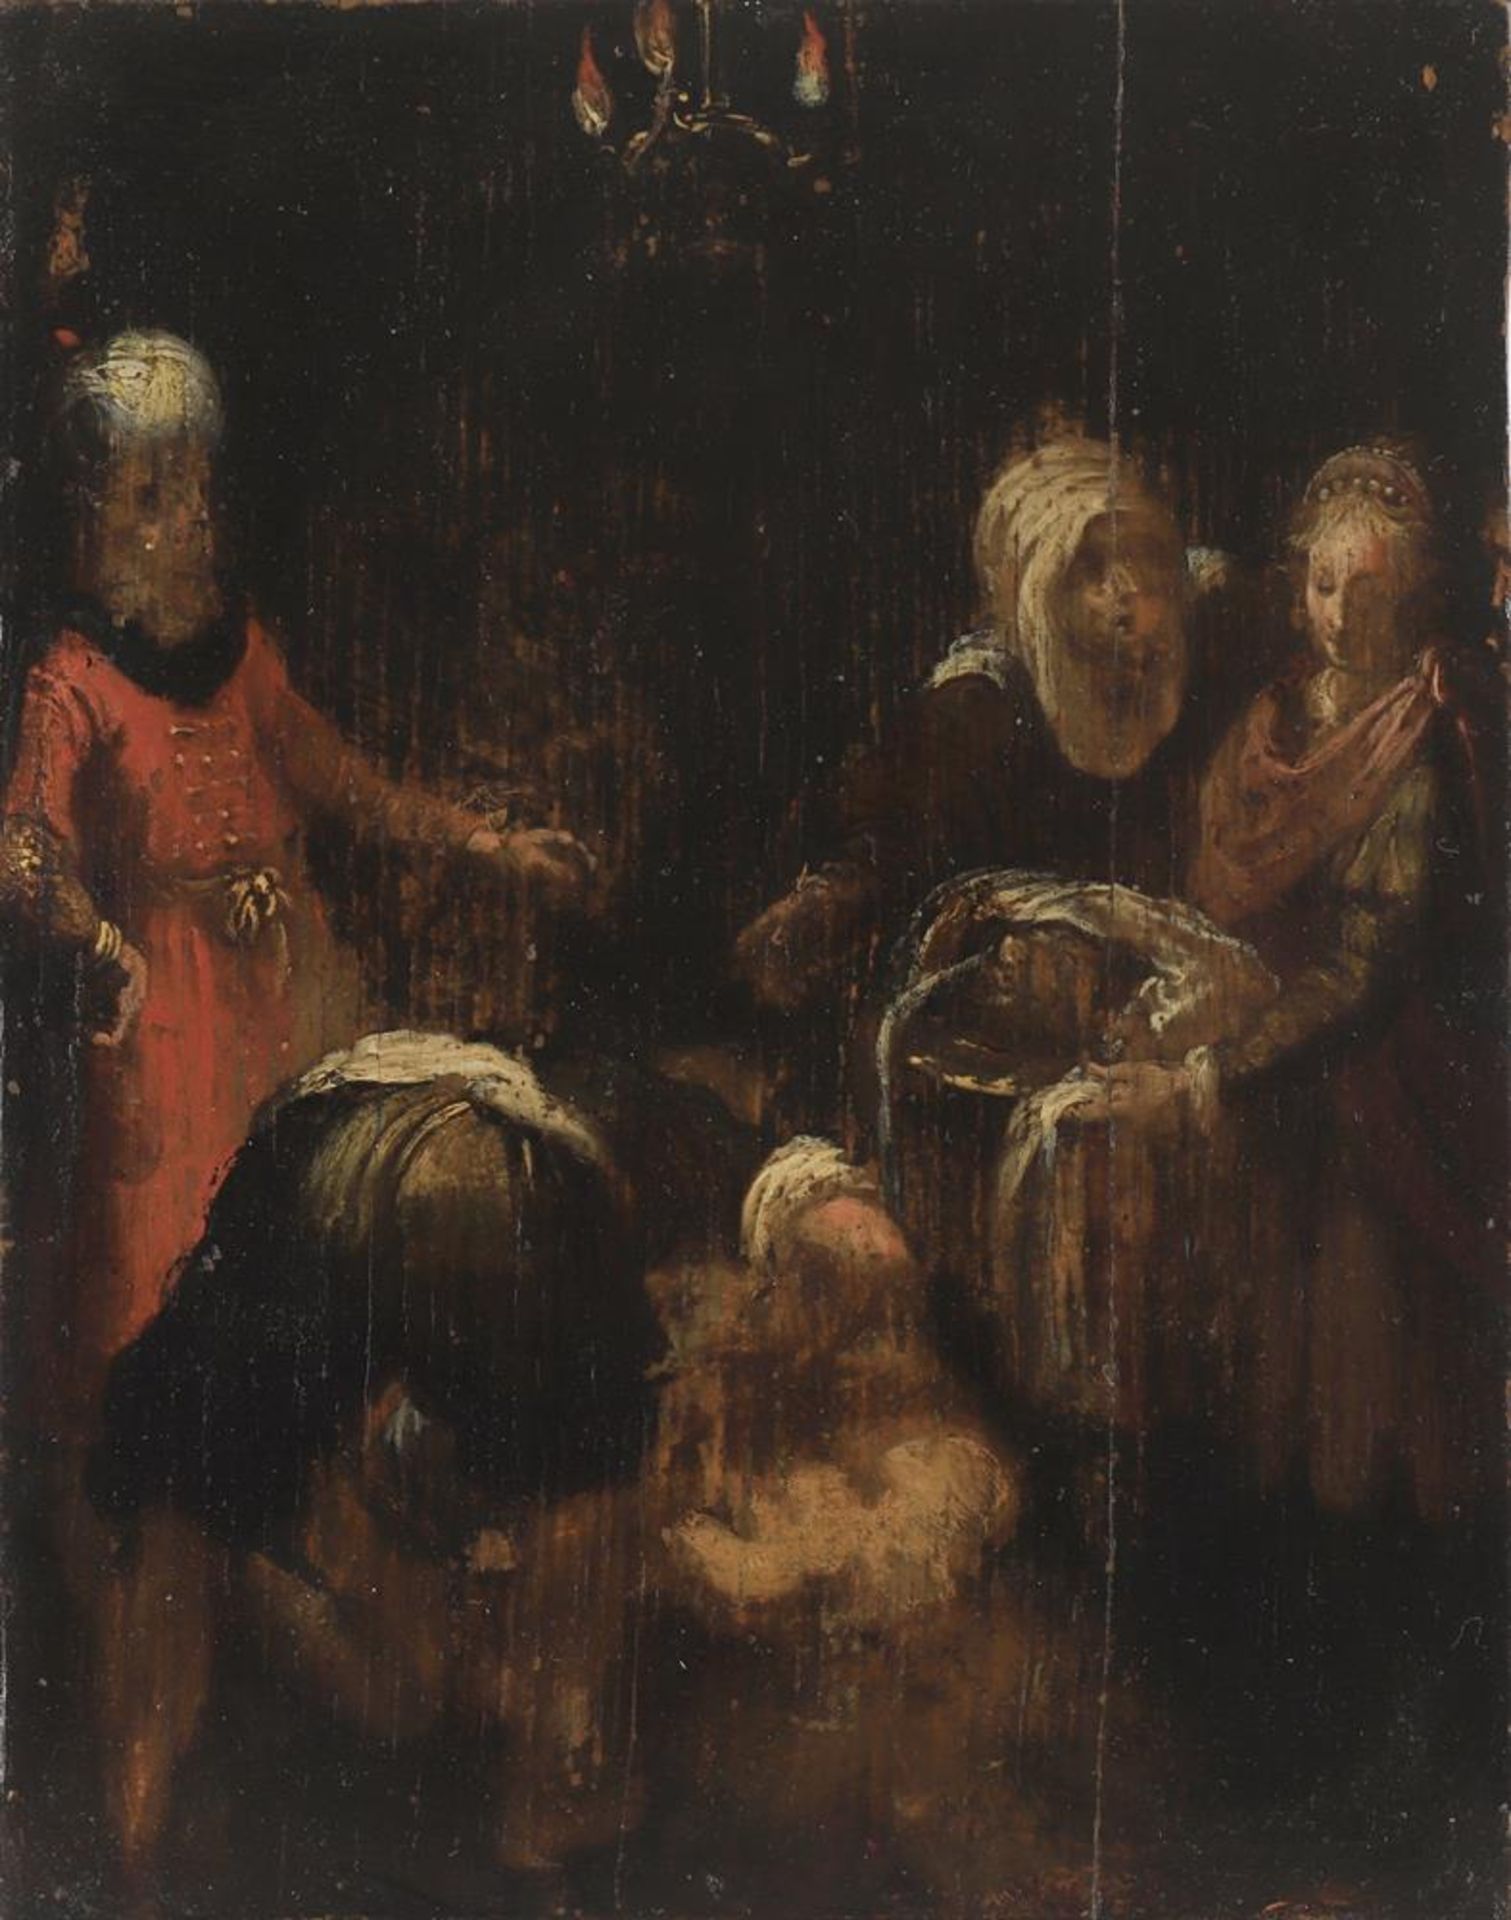 Flemish School (17th century), Salome with the head of John the Baptist, a study